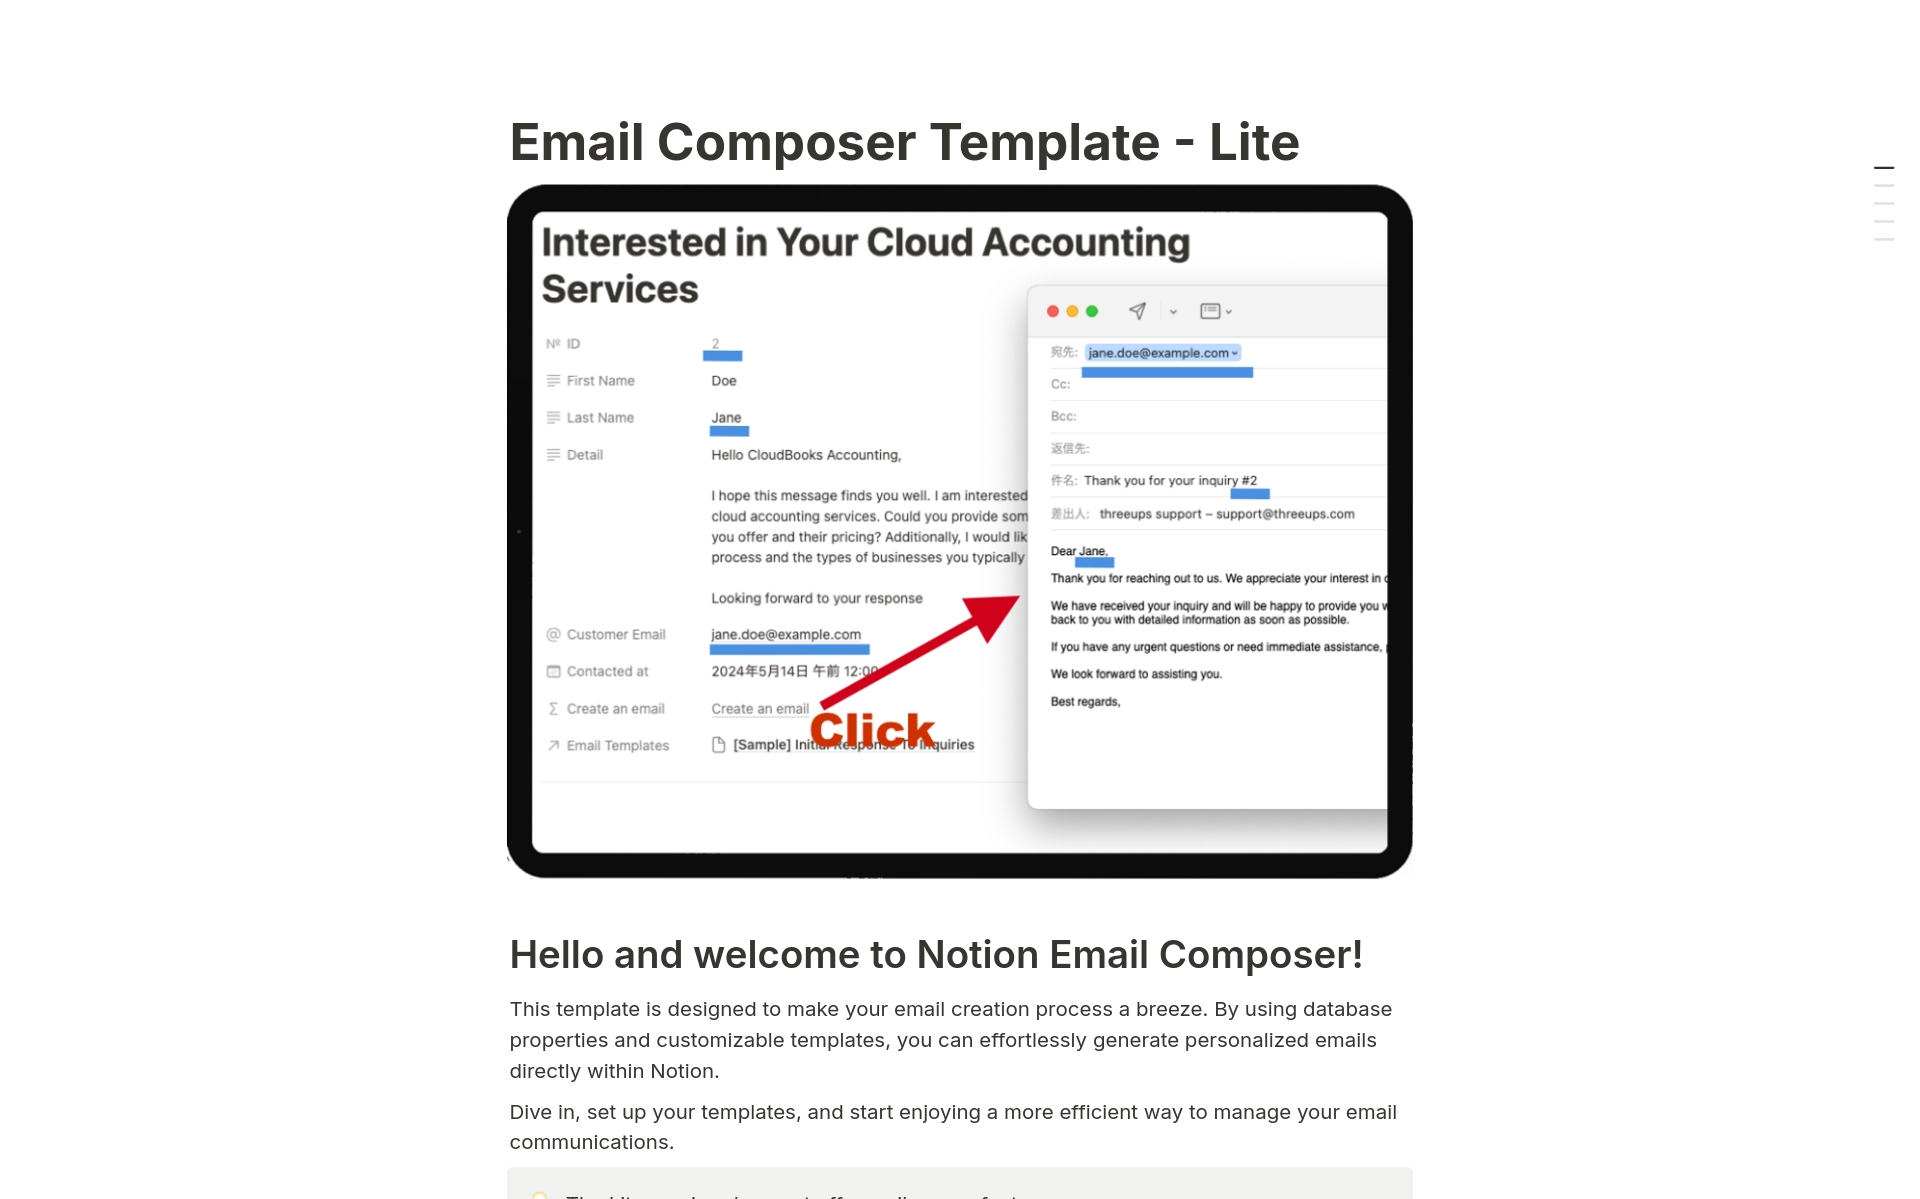 Streamline your email workflow from Notion.
With a simple click on the "Open Email" button, generate an email draft based on the selected template, and open it in your default email client. The template's subject and body will be pre-filled, ready for you to review and send.